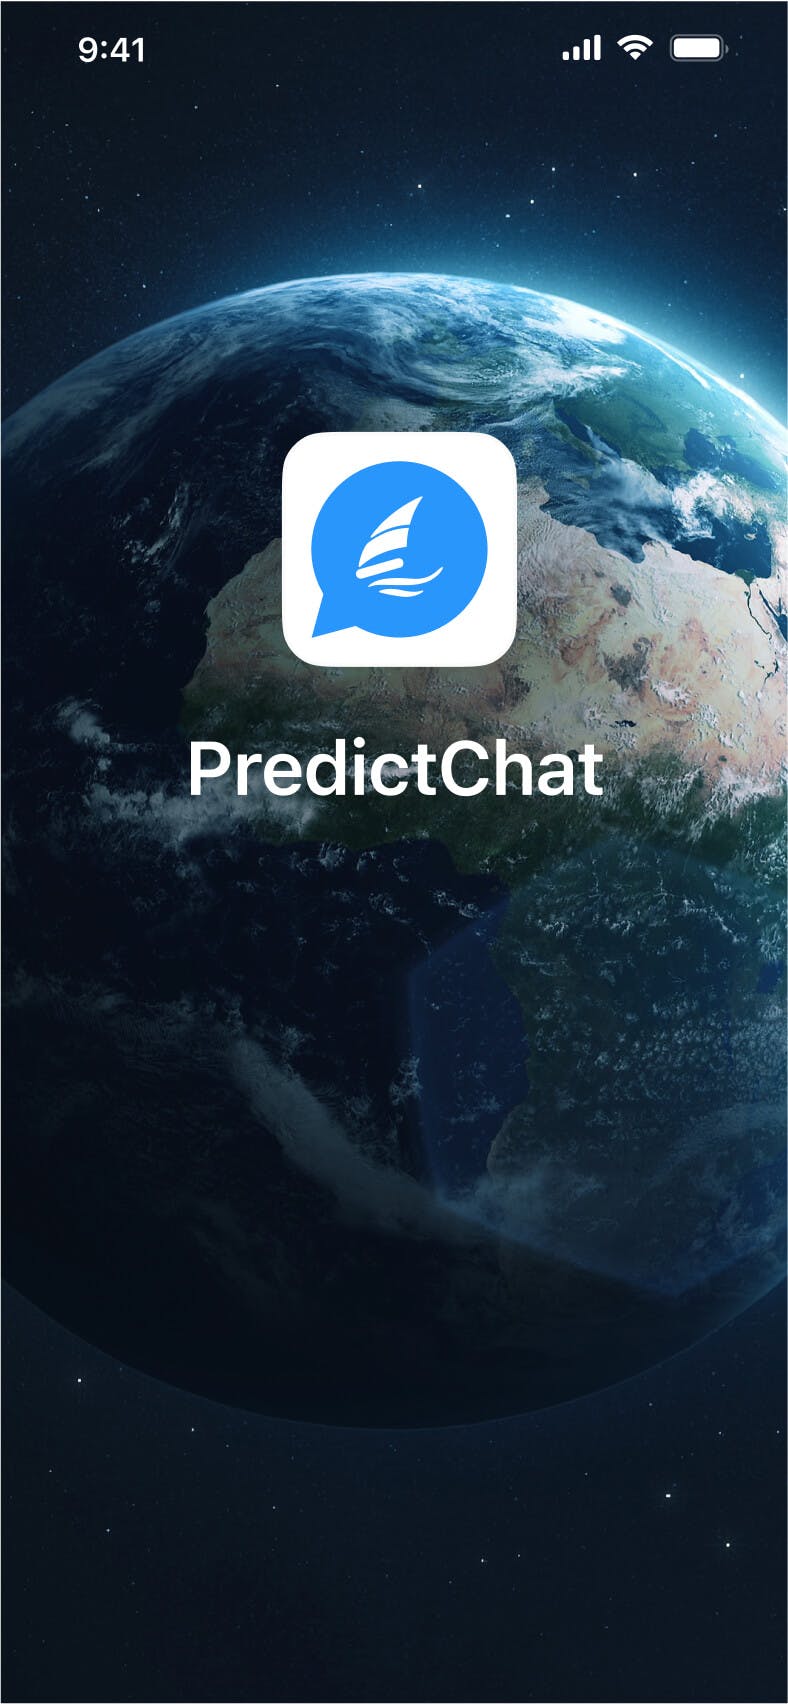 Why use the PredictChat SMS service?